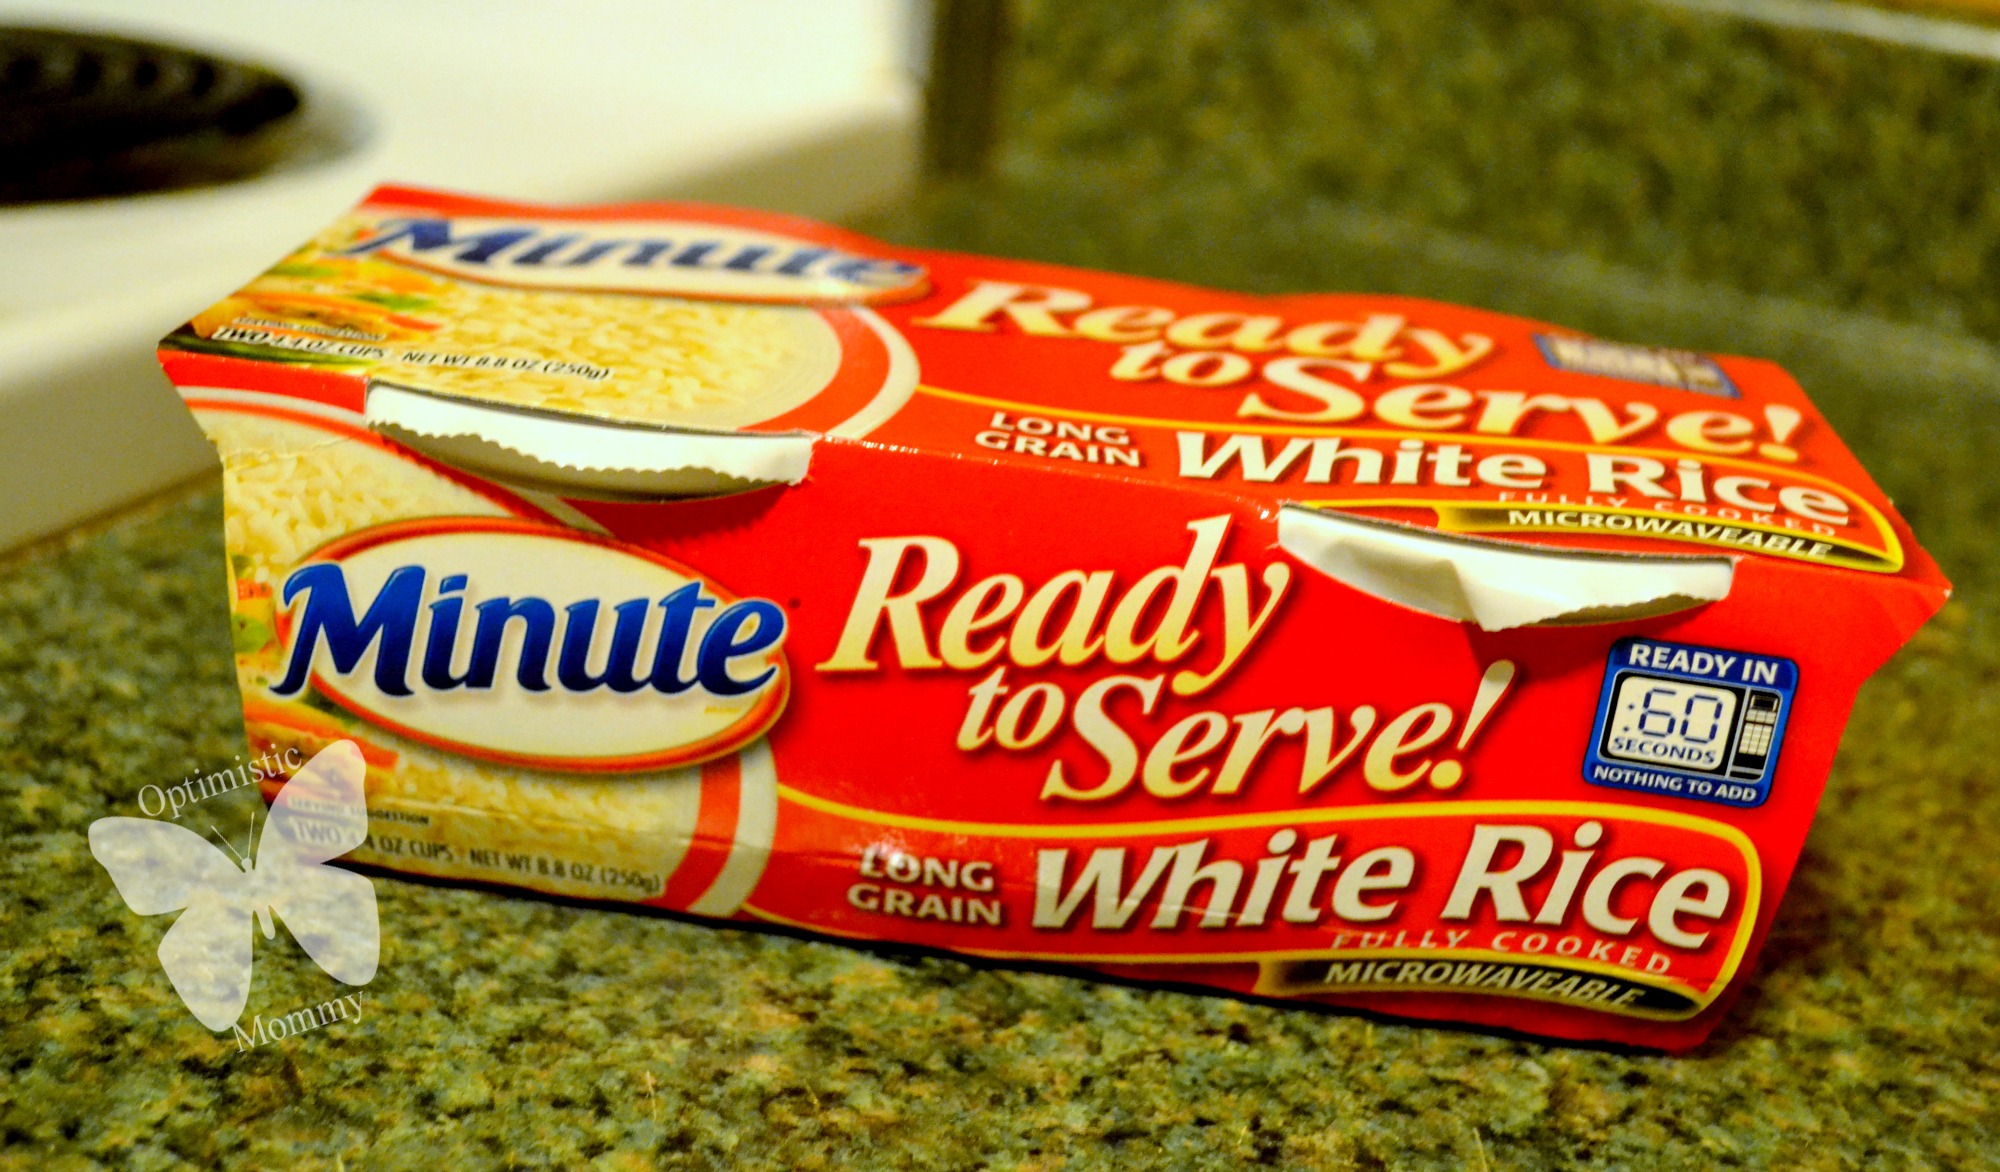 Minute Ready to Serve White Rice